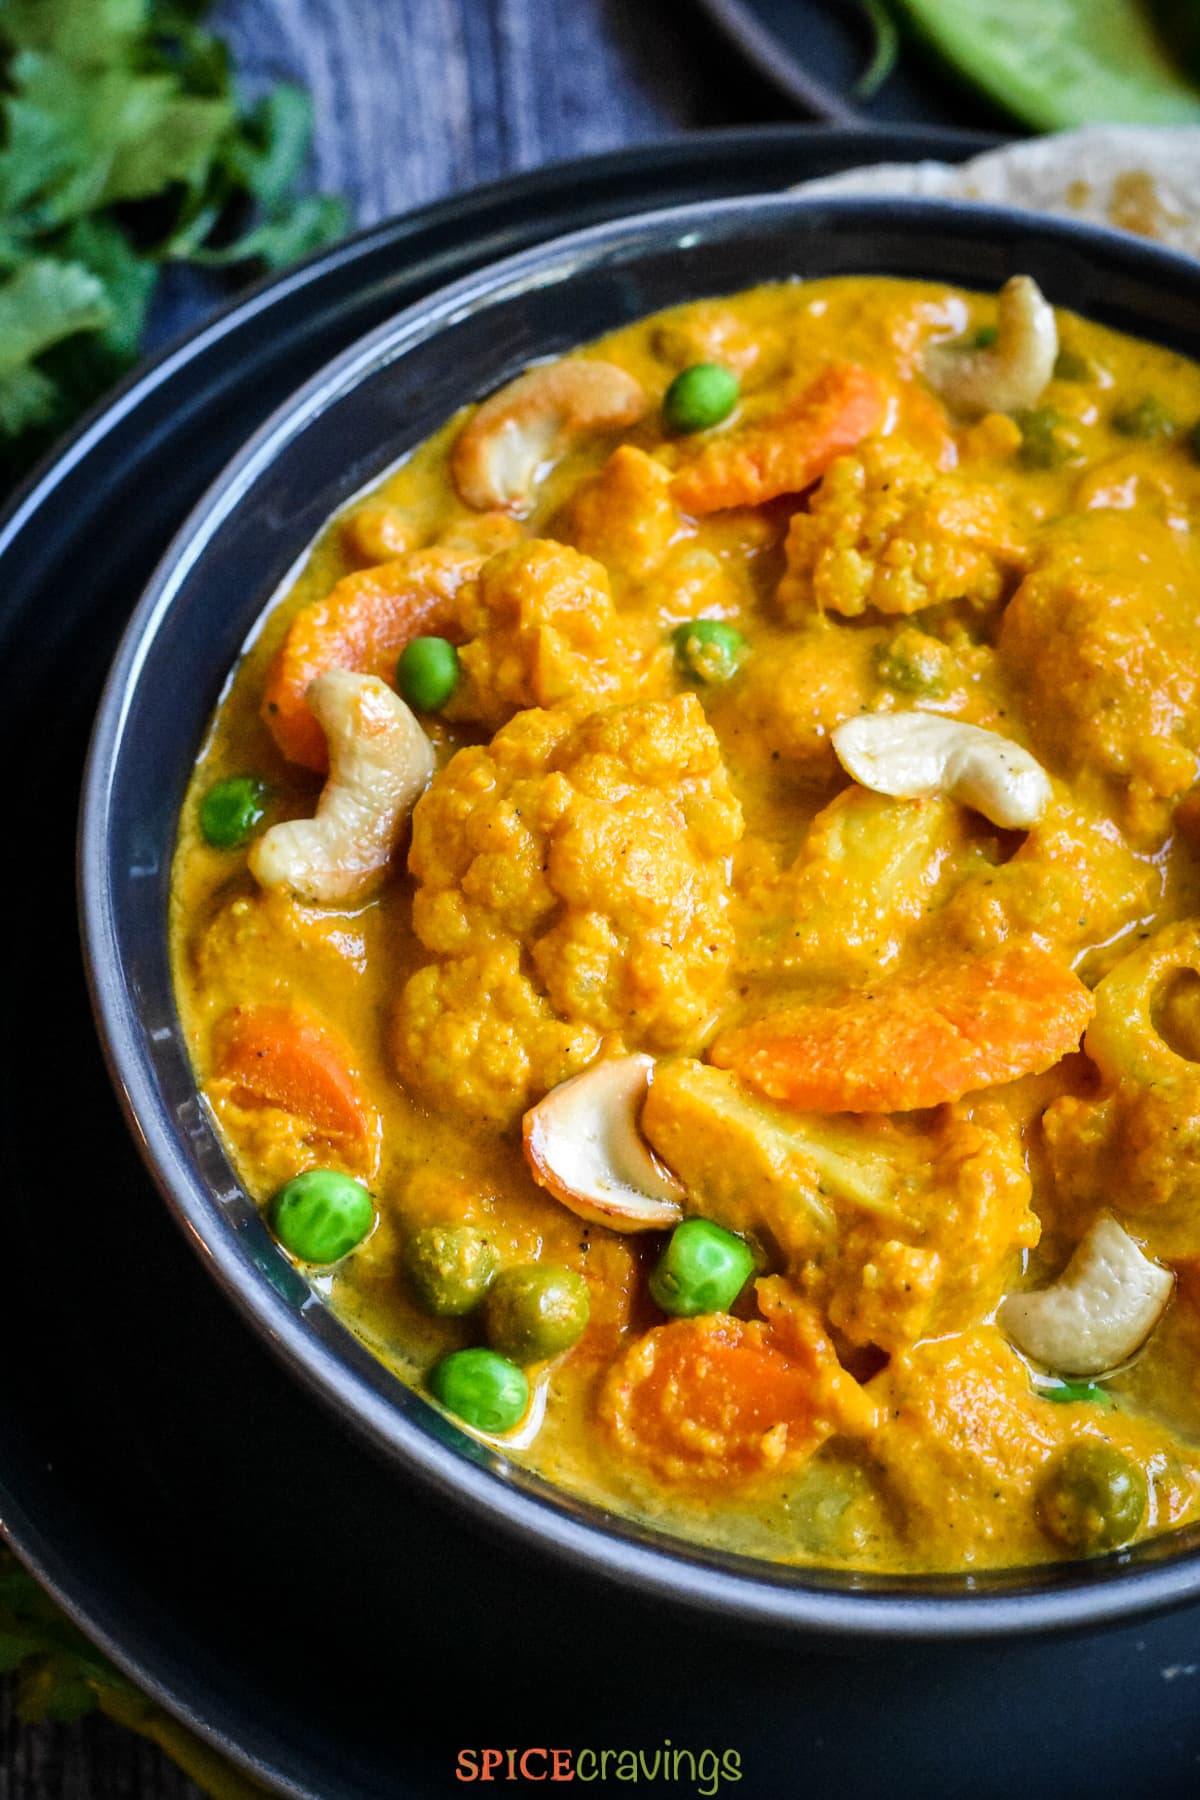 Vegetable Korma with cauliflower and carrots